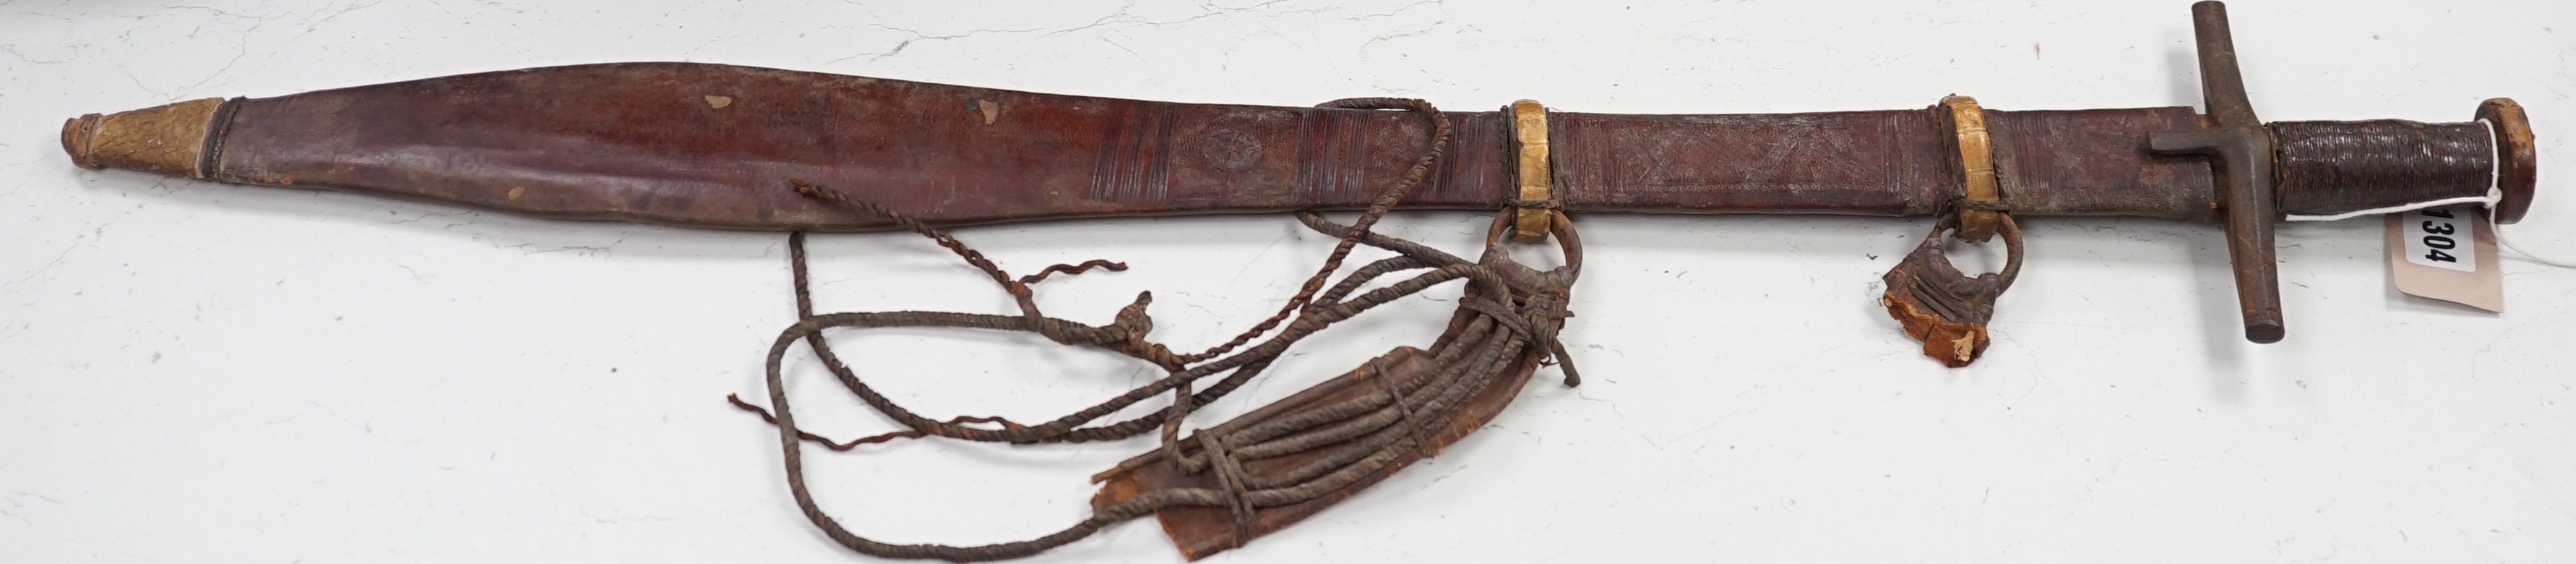 A Sudanese Kaskara sword with snake skin mounted leather scabbard, total length 79cm